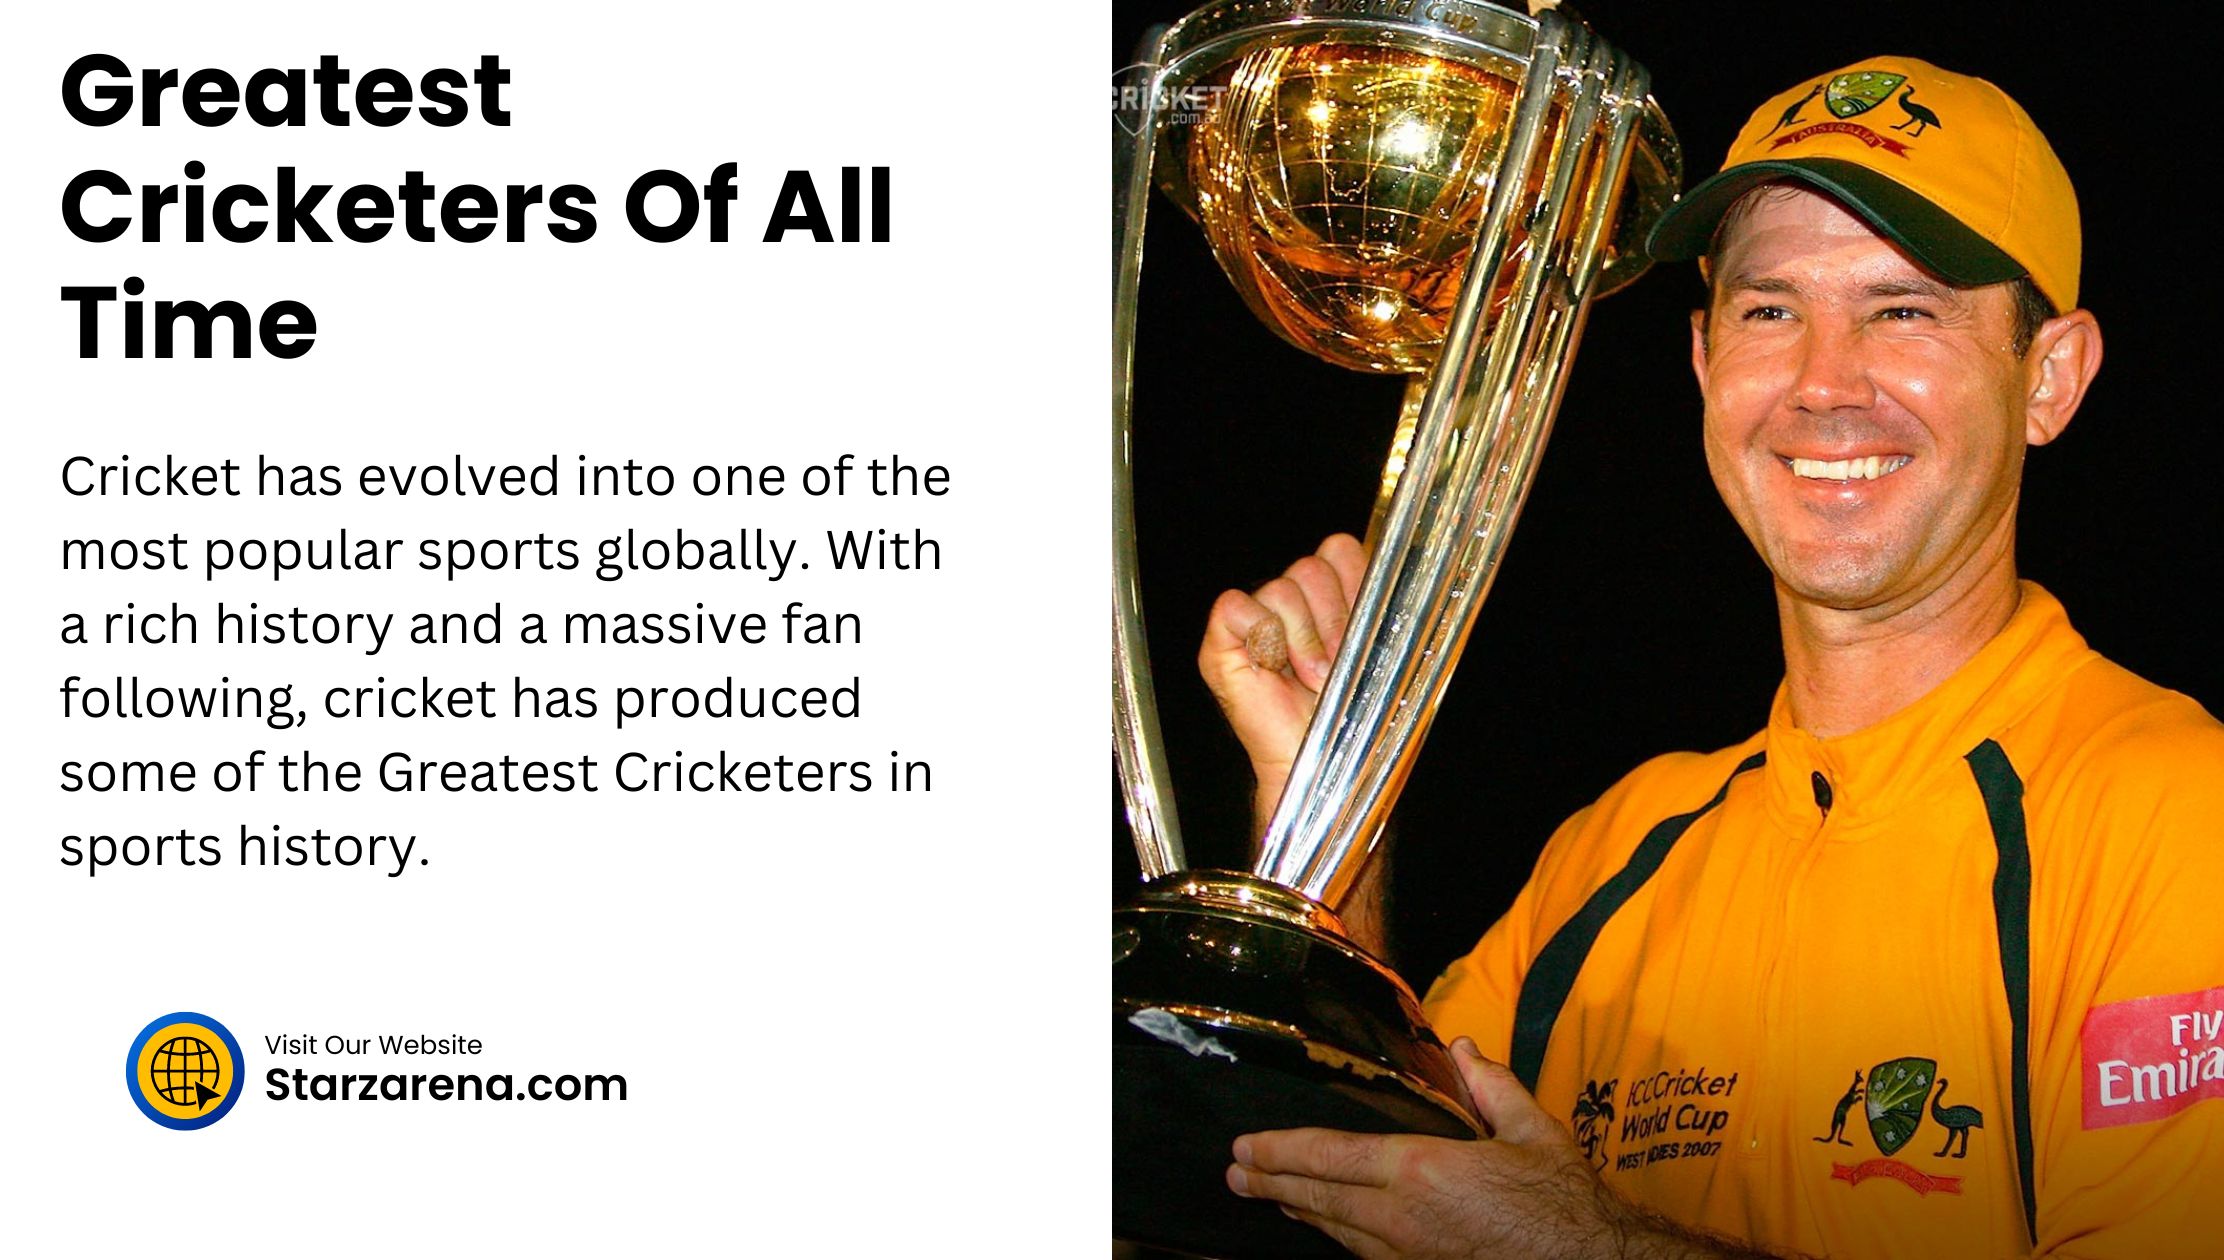 Greatest Cricketers Of All Time